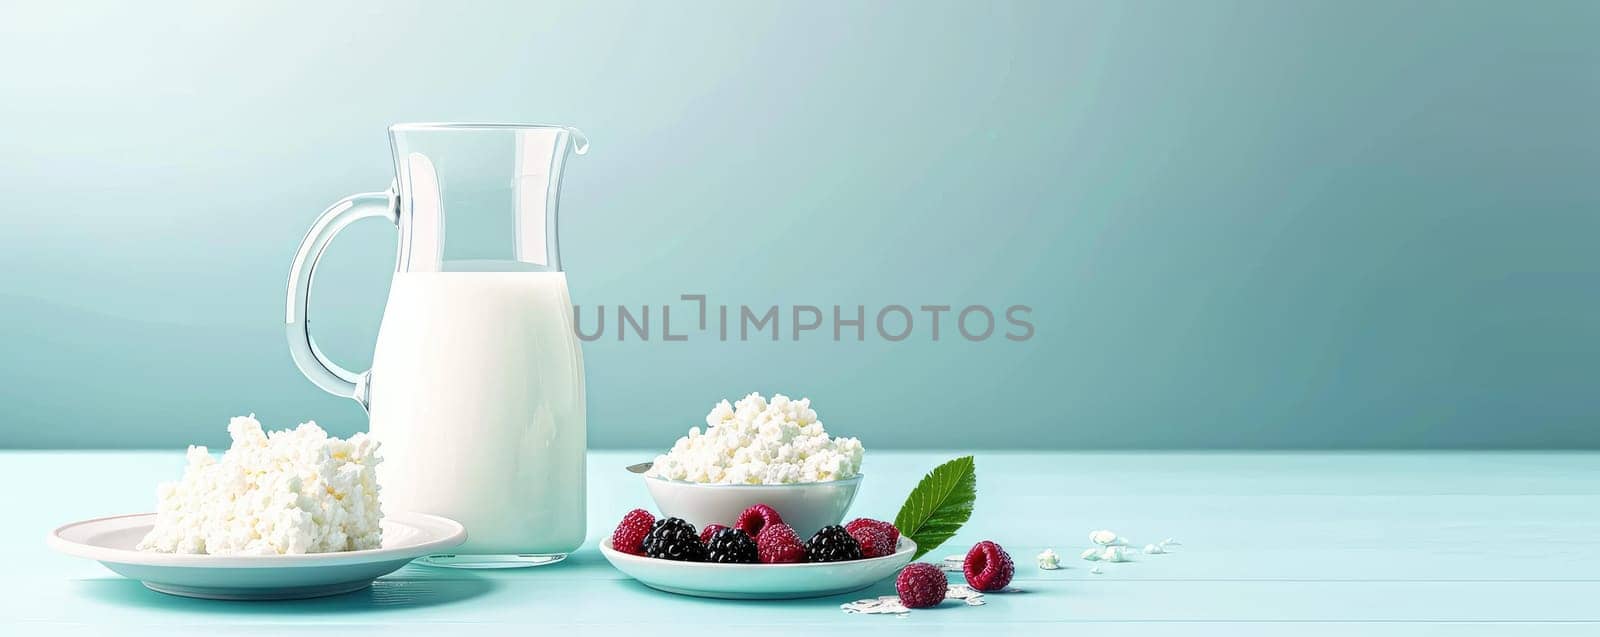 Morning breakfast with jug of milk, cottage cheese and berries on blue background by Yurich32